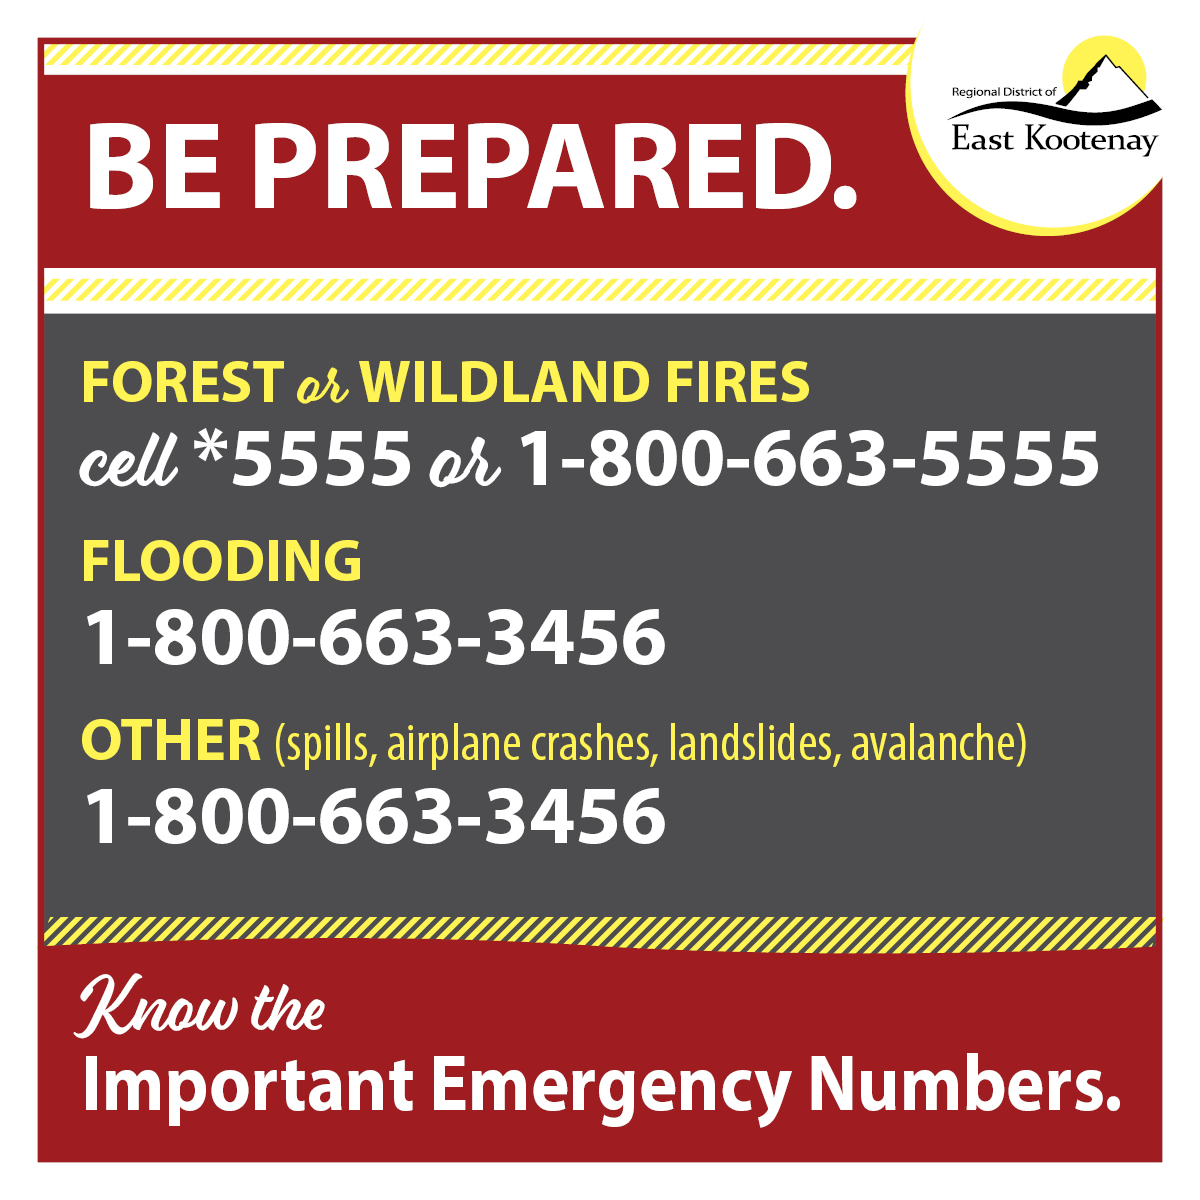 It's Emergency Preparedness Week (May 5 - 11, 2024). In an emergency, having the correct numbers close is always important. Put these numbers in your phone; they will be there if you ever need them. preparedbc.ca. #Cranbrook @RDEastKootenay @cranbrookfire @PreparedBC